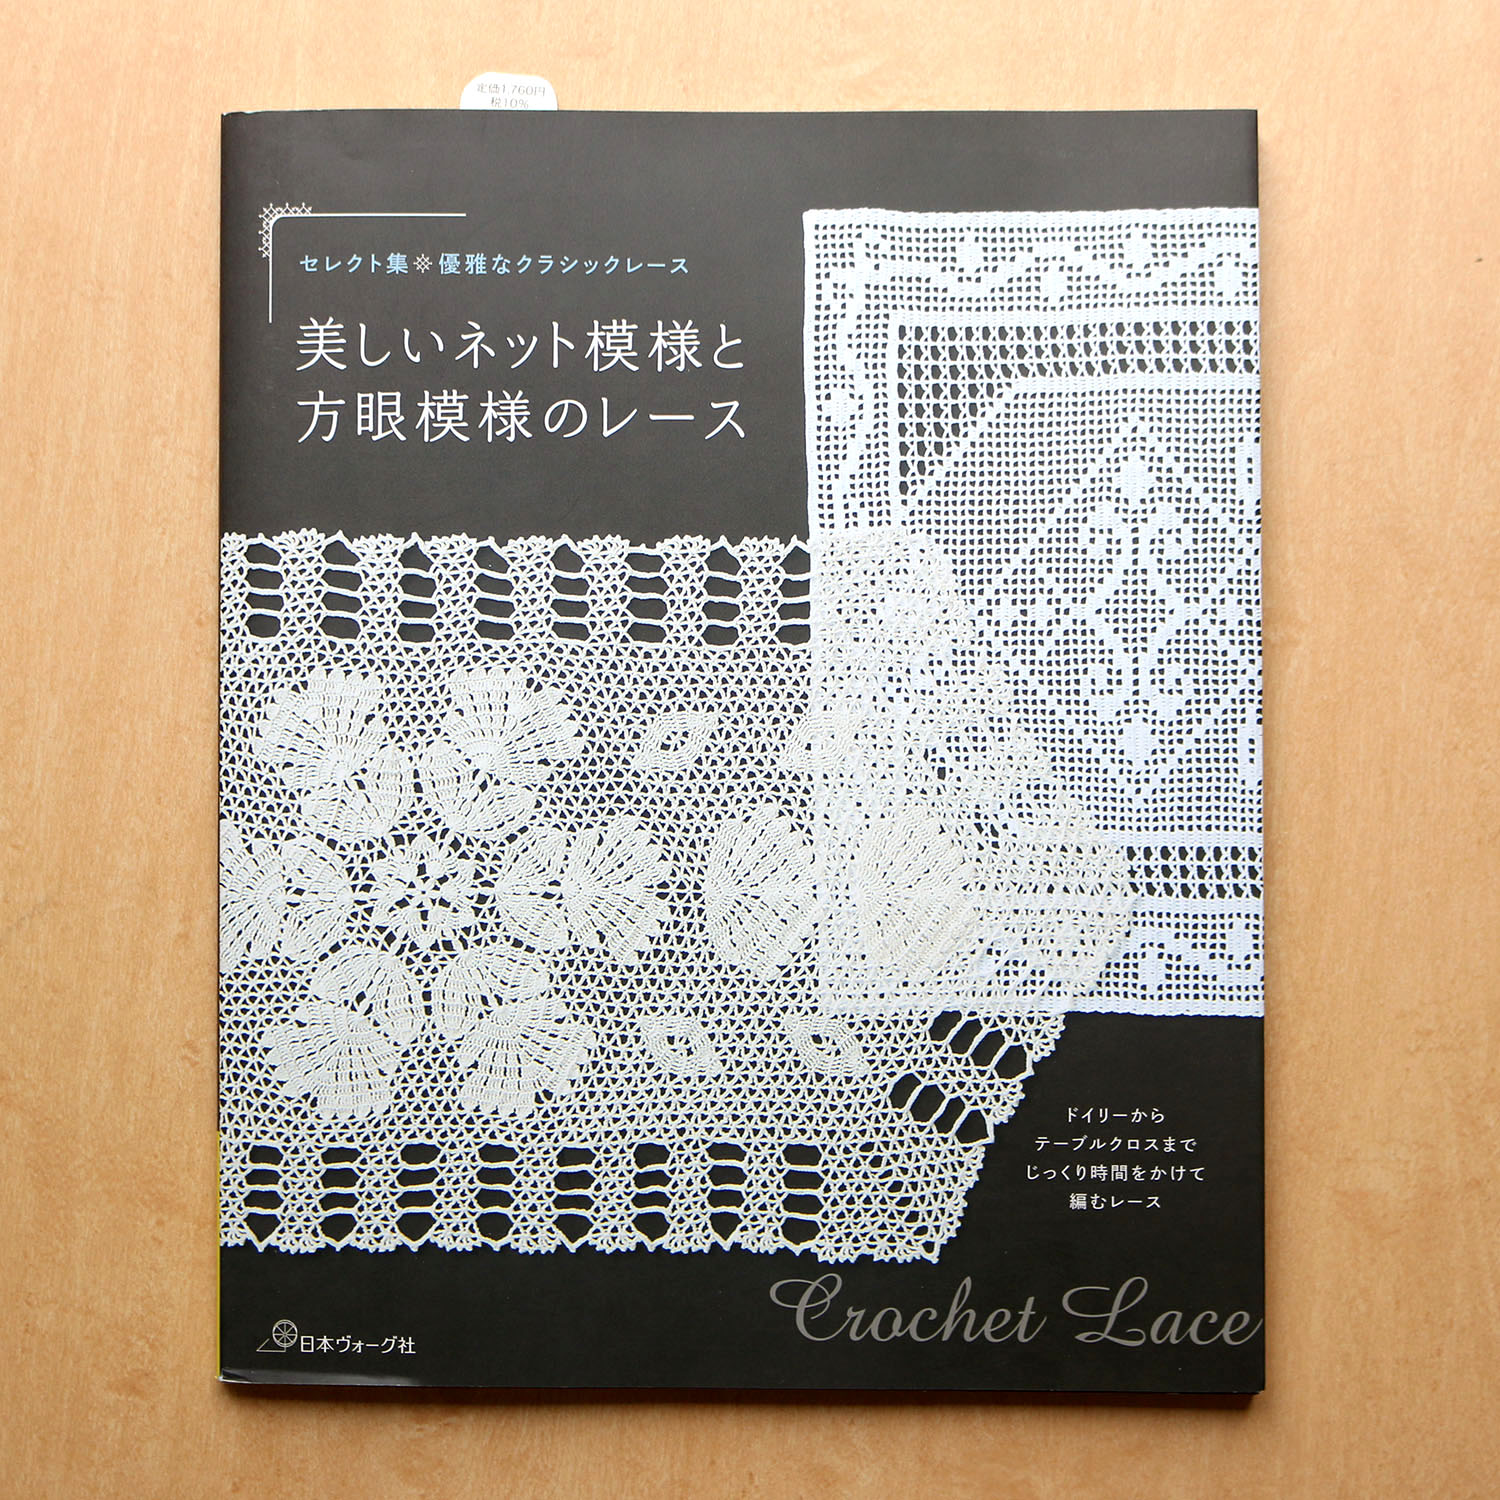 [Order upon demand, not returnable]NV70677 Crochet Lace (book)